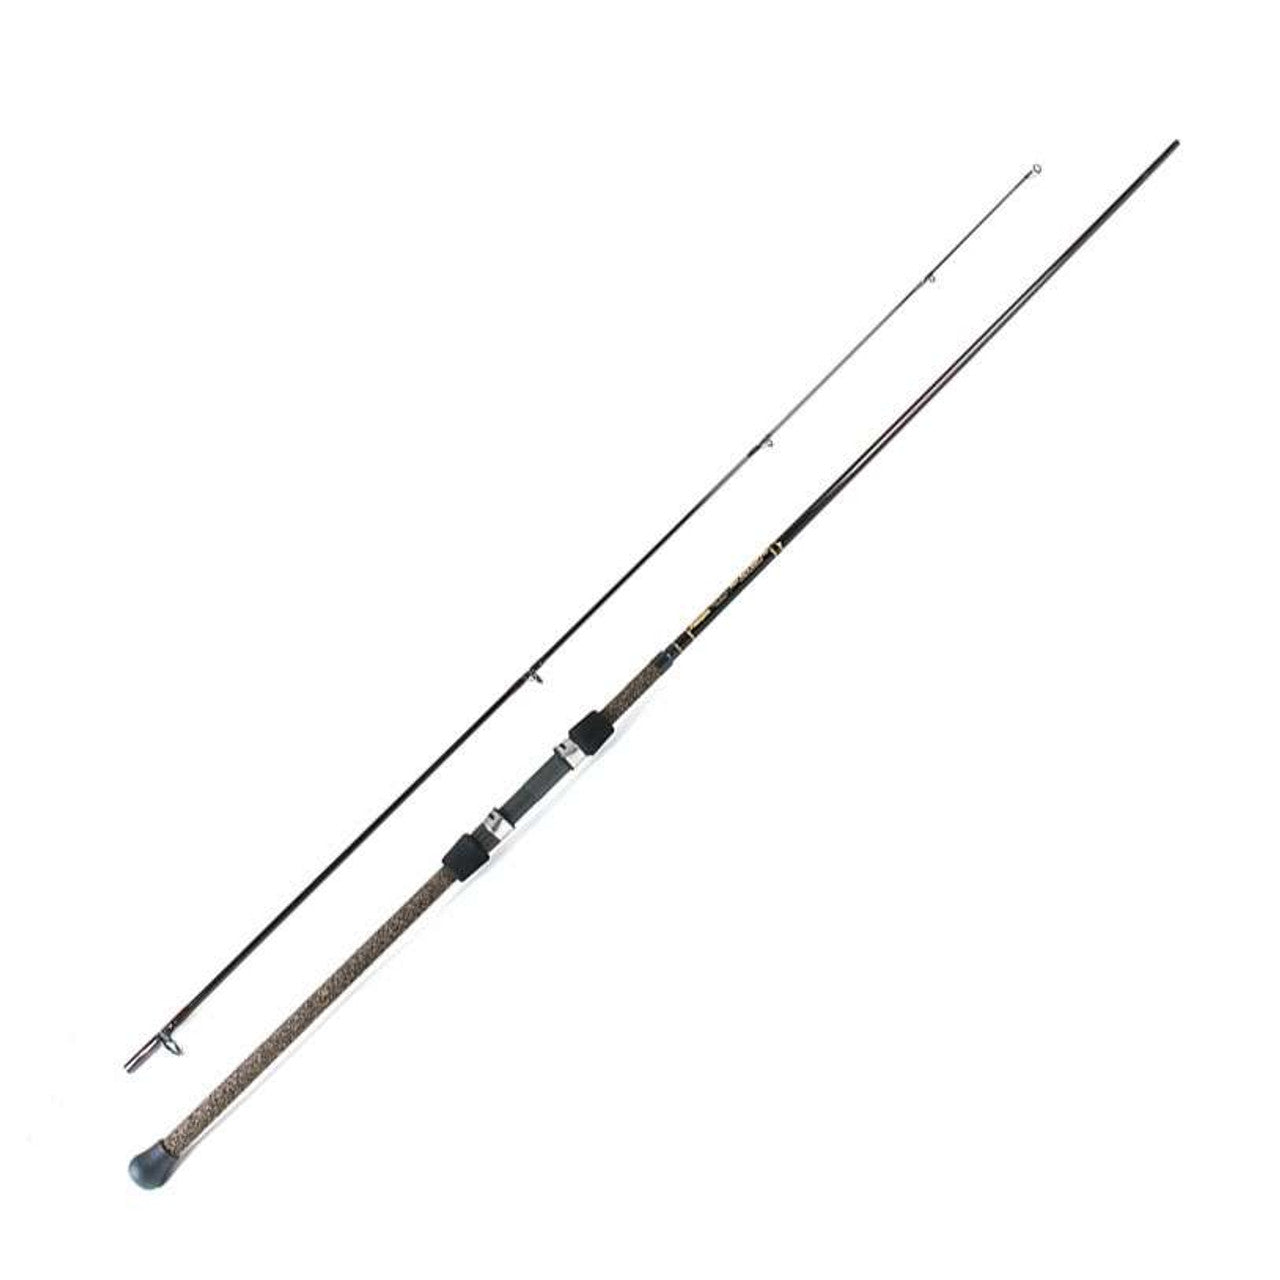 Graphite Surf & Inlet Rod Blanks, ISSW1089 / 9'0 / 20-40 lb. / 1pc